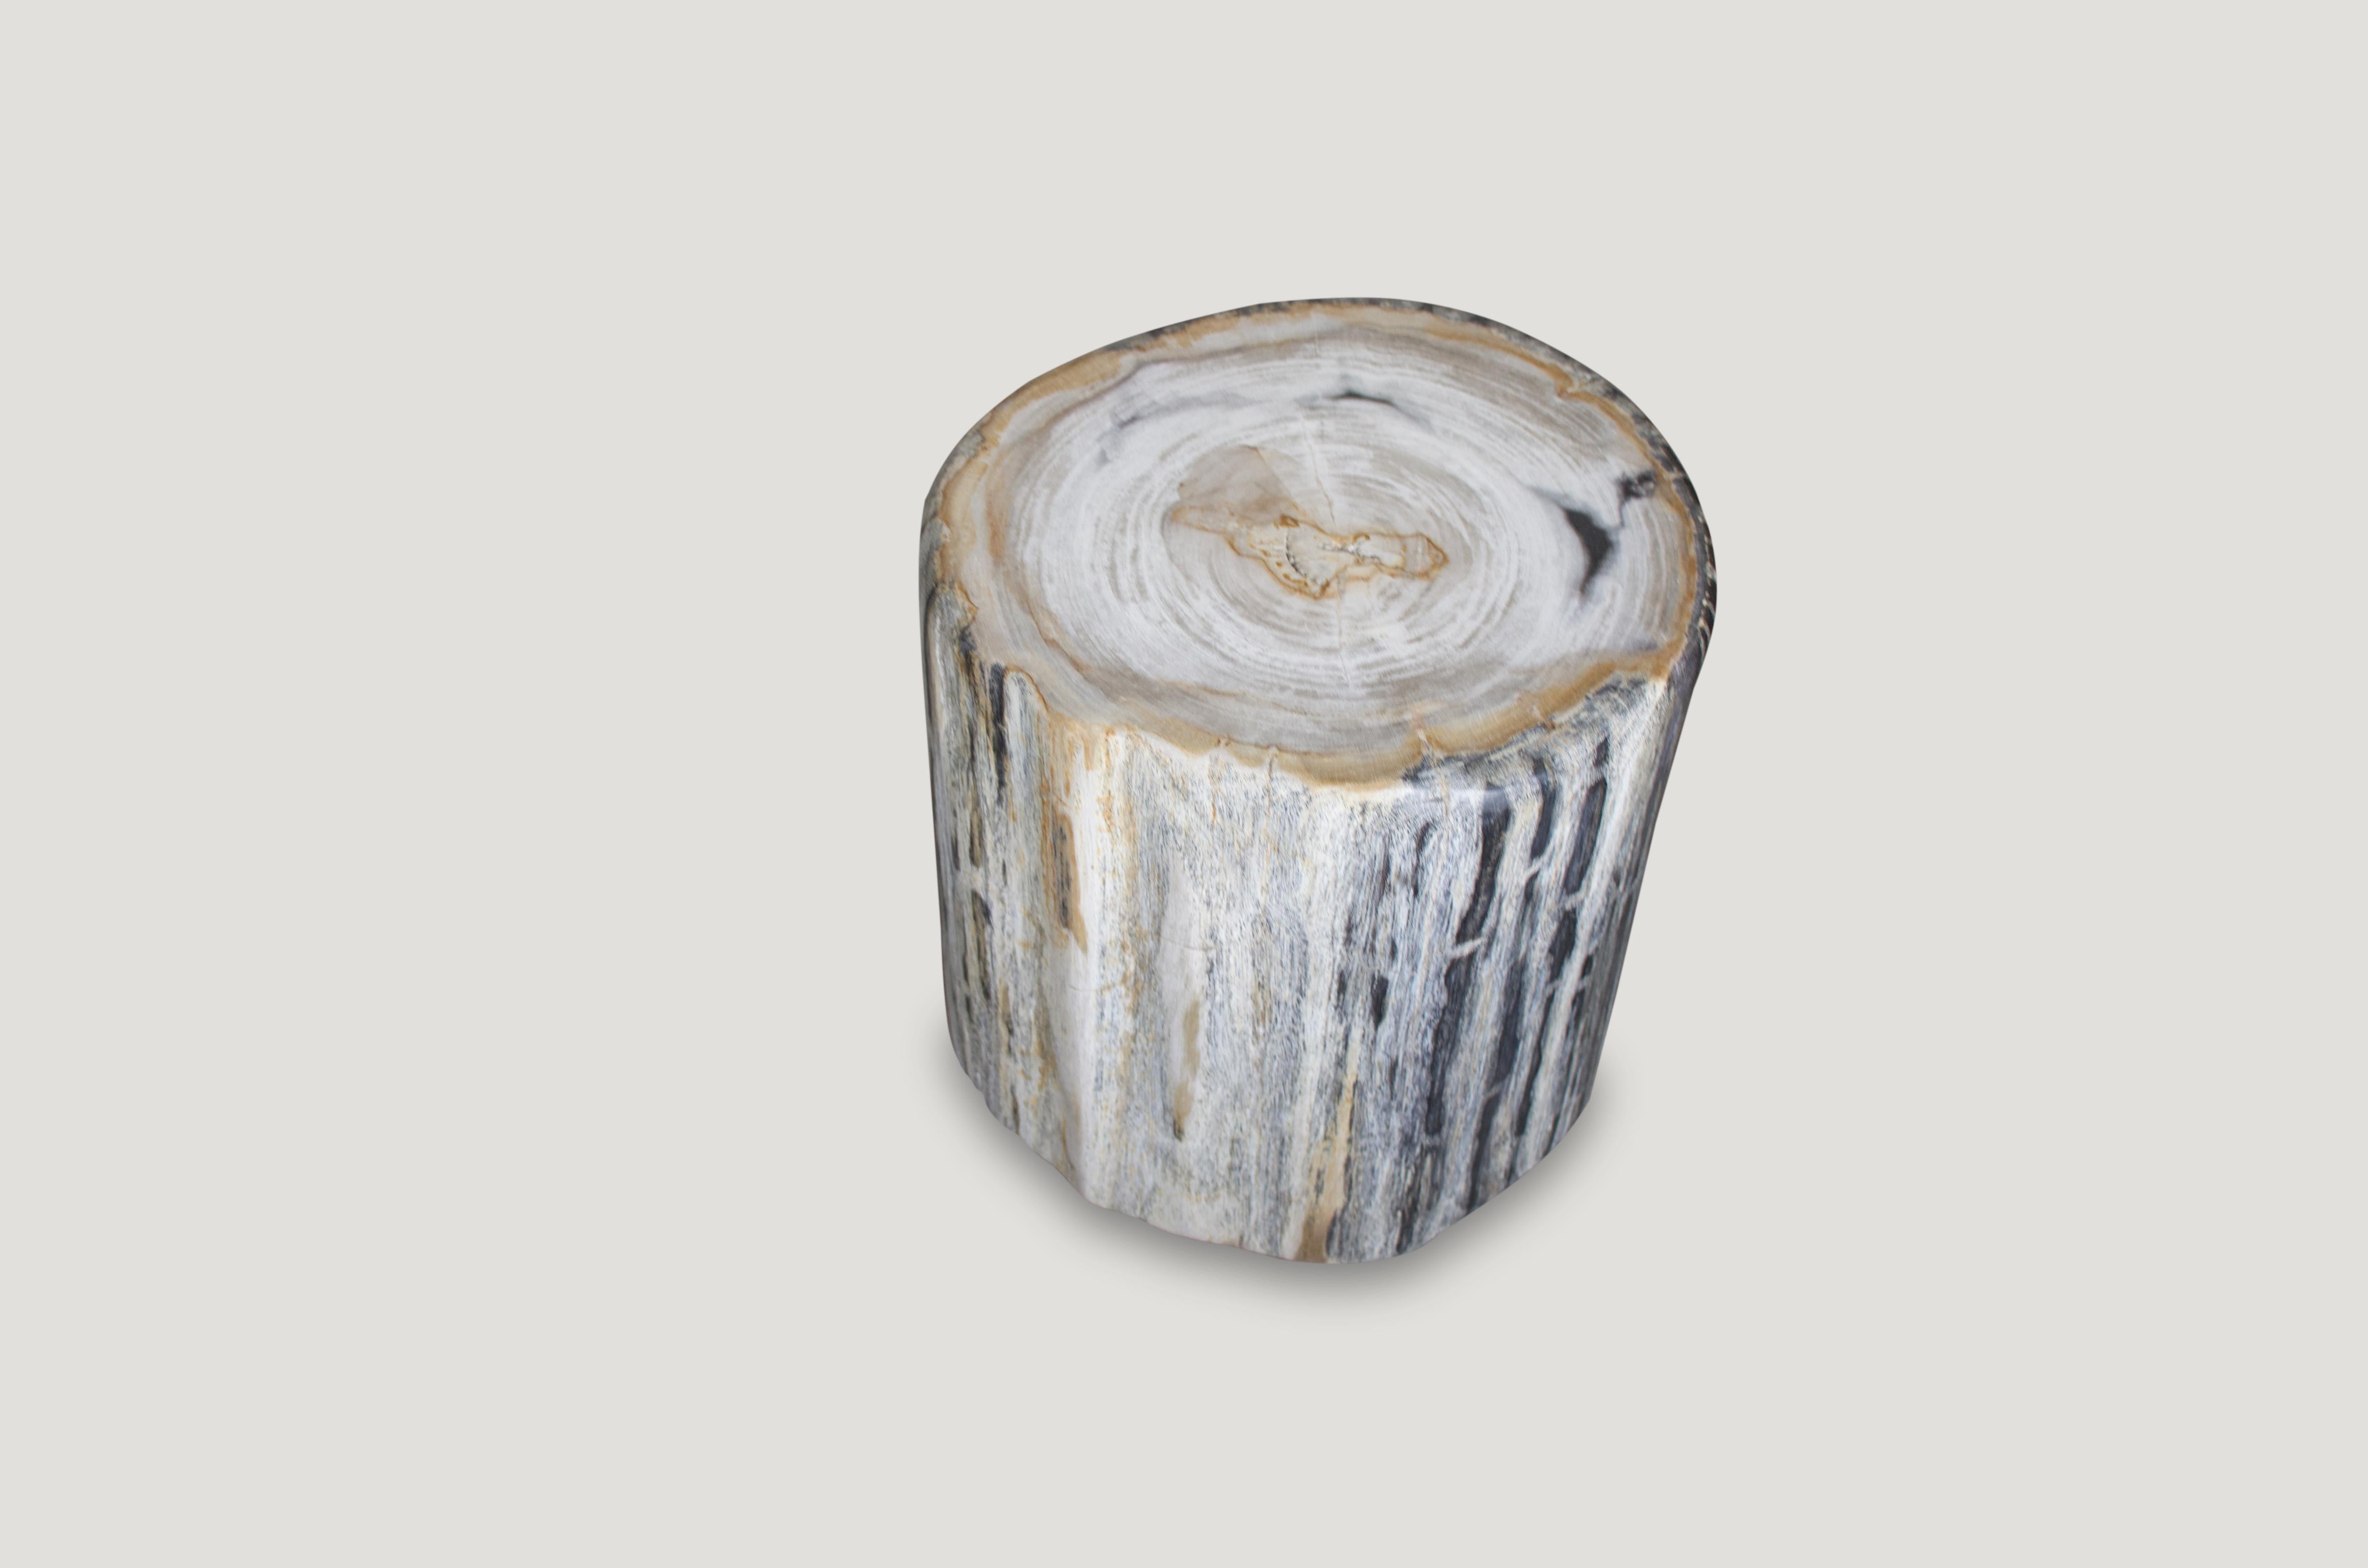 We have a fabulous collection of these black and white, hard to find high quality petrified wood side tables, all cut from the same petrified log. The price reflects the one shown.

As with a diamond, we polish the highest quality fossilized